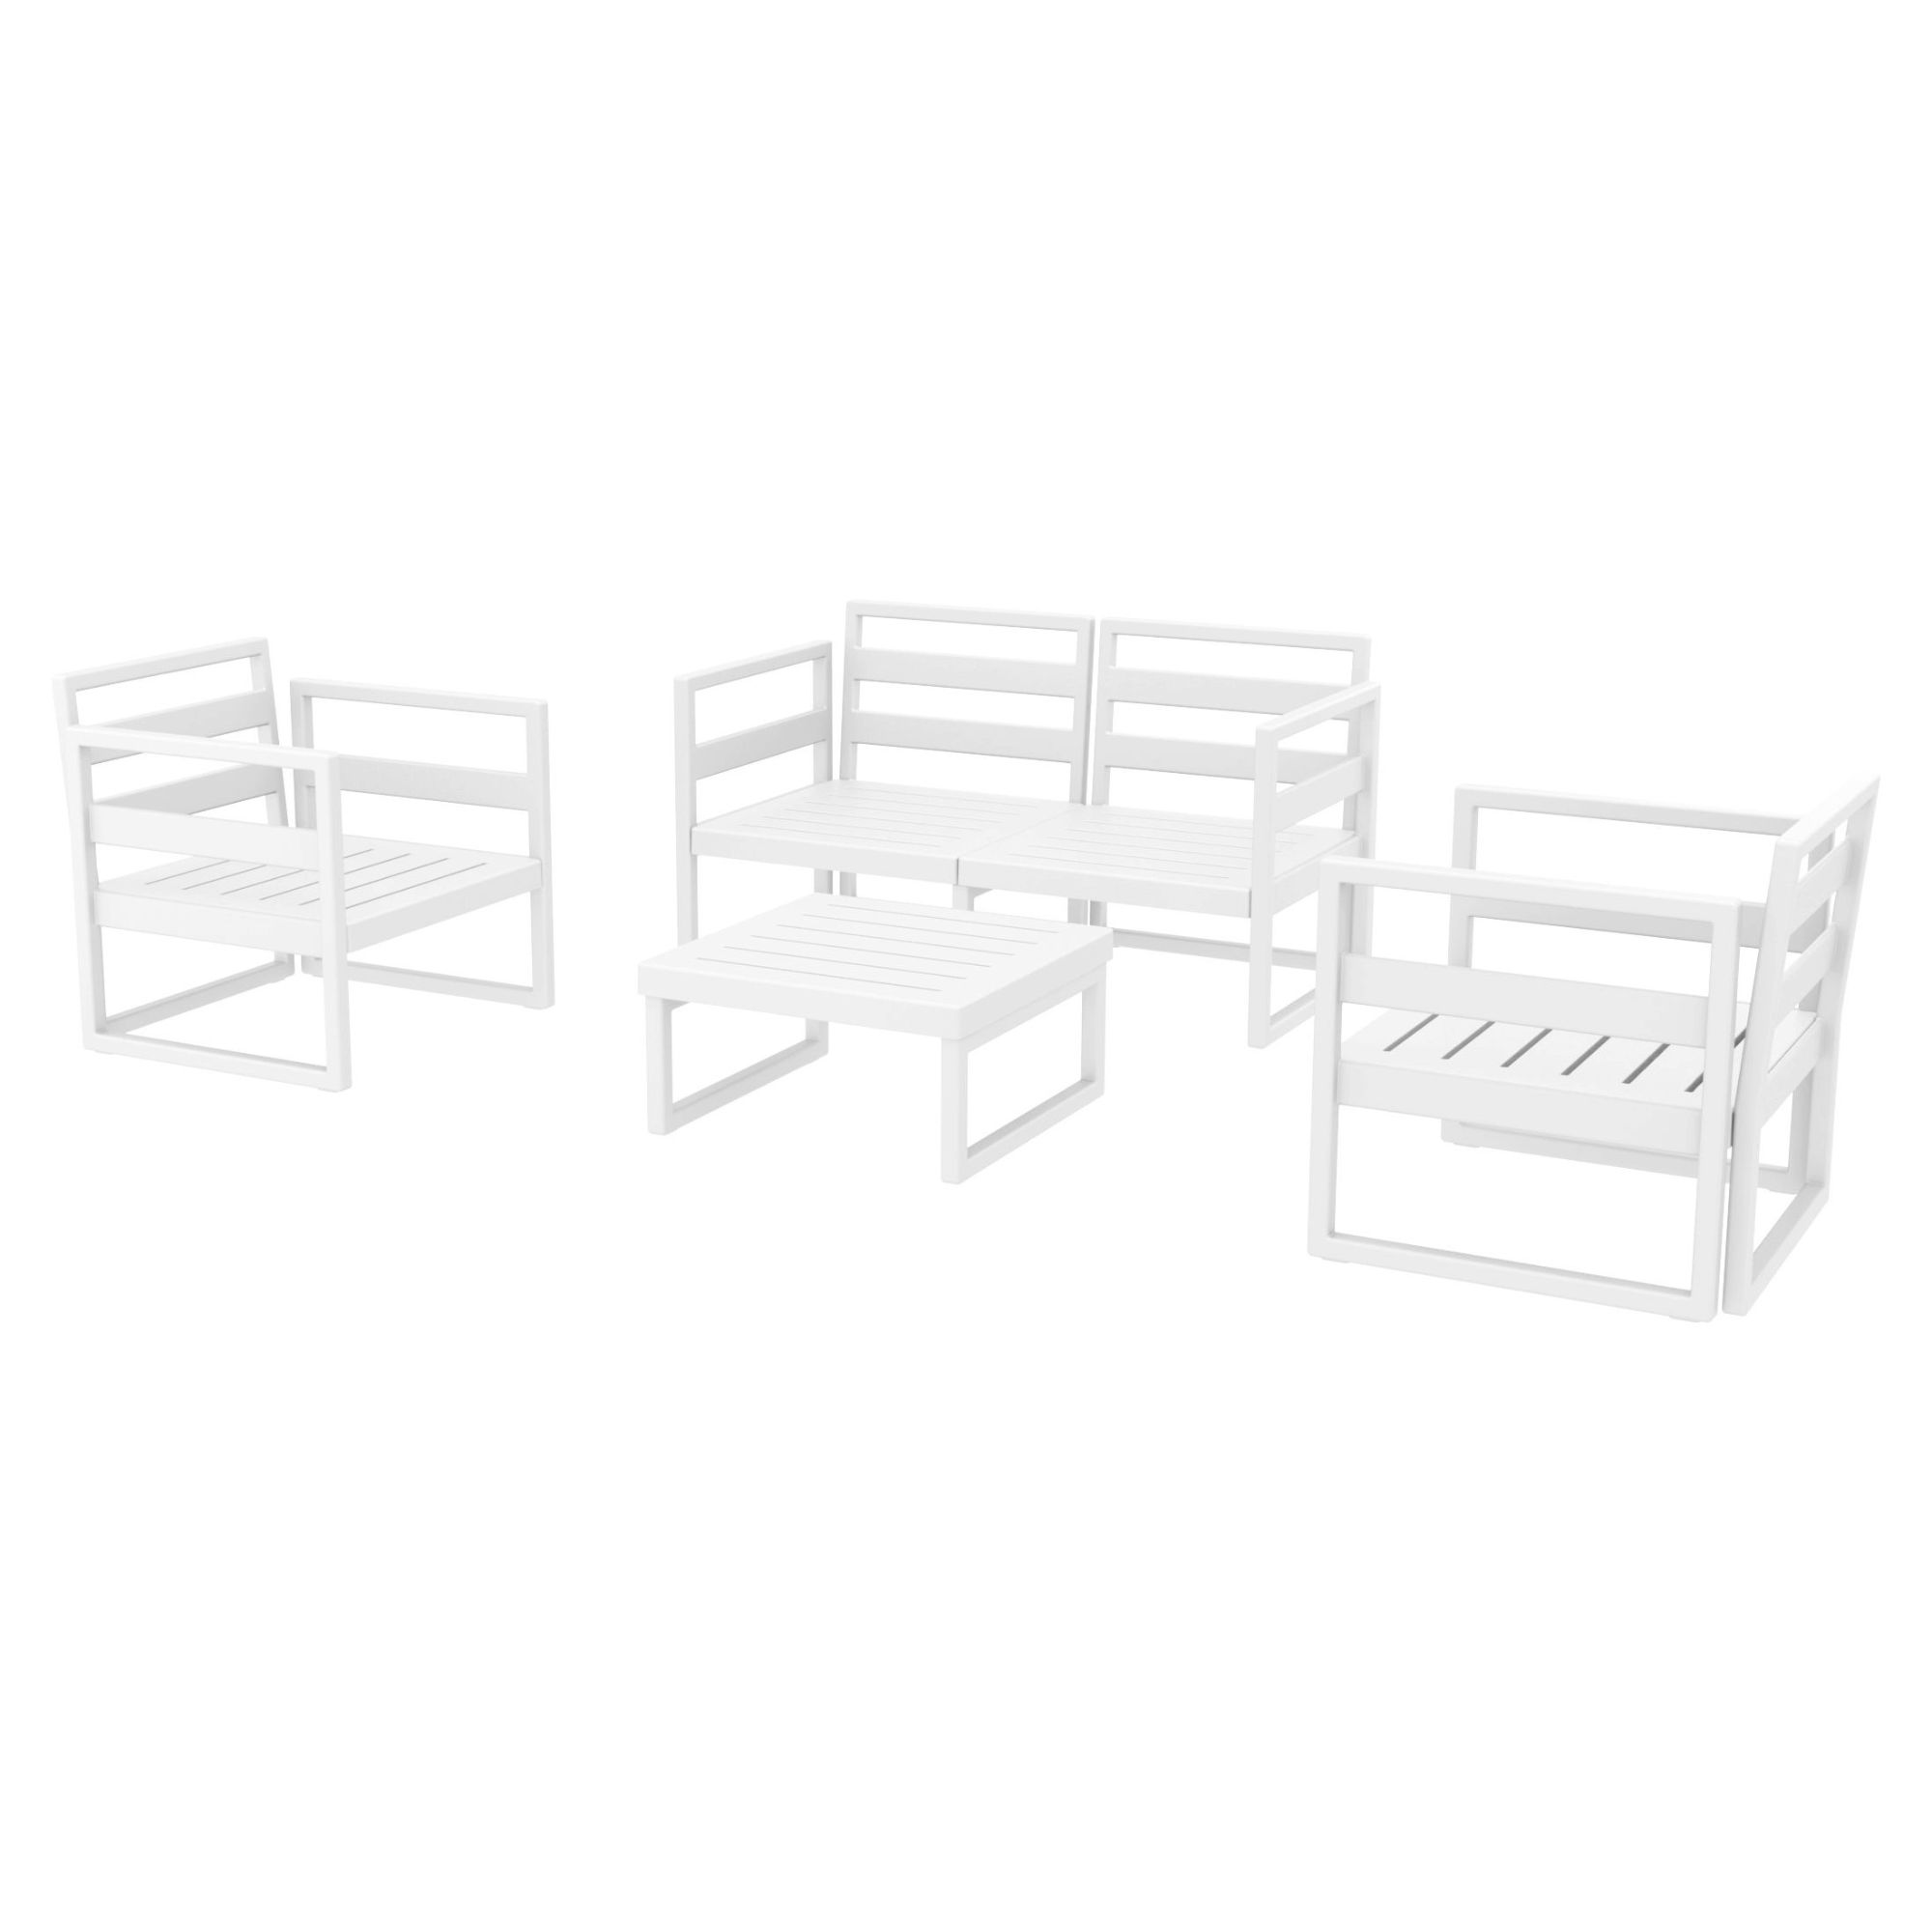 4 Piece White Outdoor Patio Lounge Set with Charcoal Sunbrella Cushion 54.5" - image 4 of 4